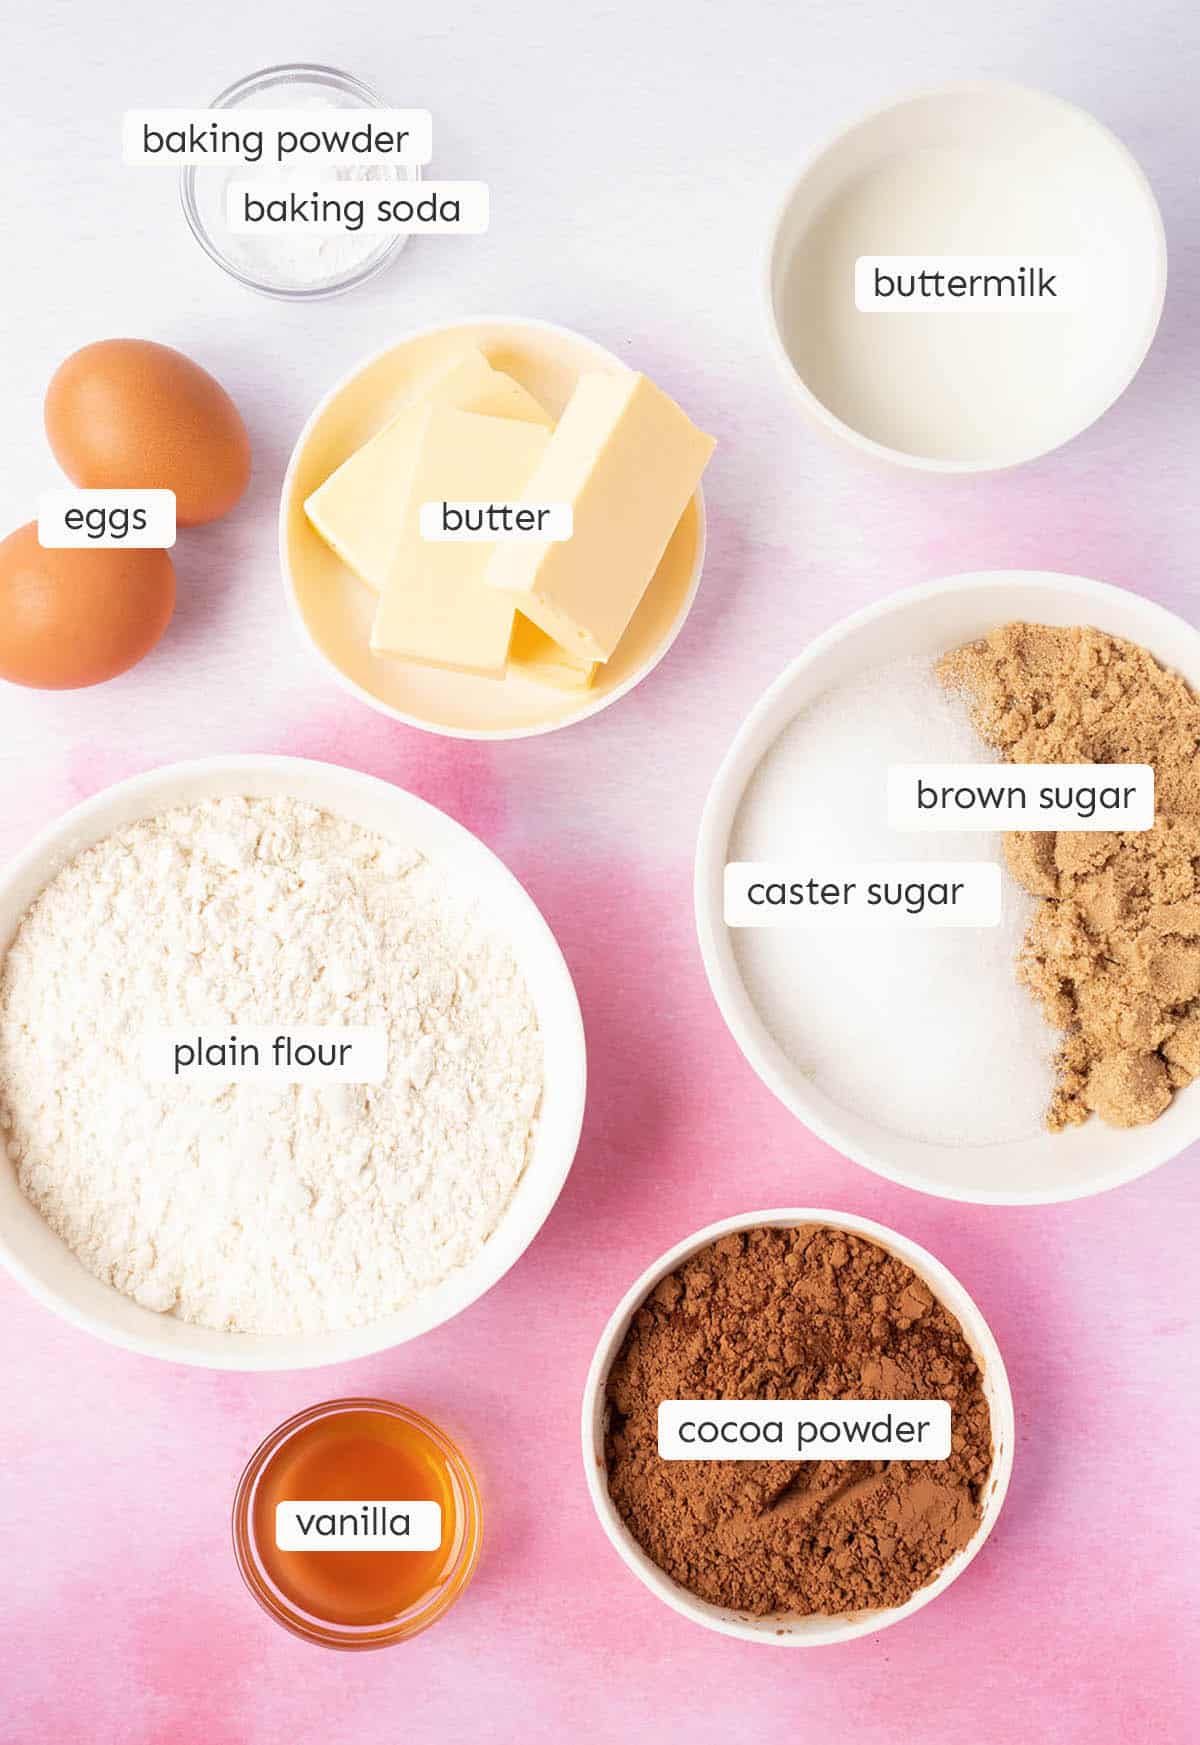 All the ingredients needed to make chocolate buttermilk cake from scratch on a pink background.